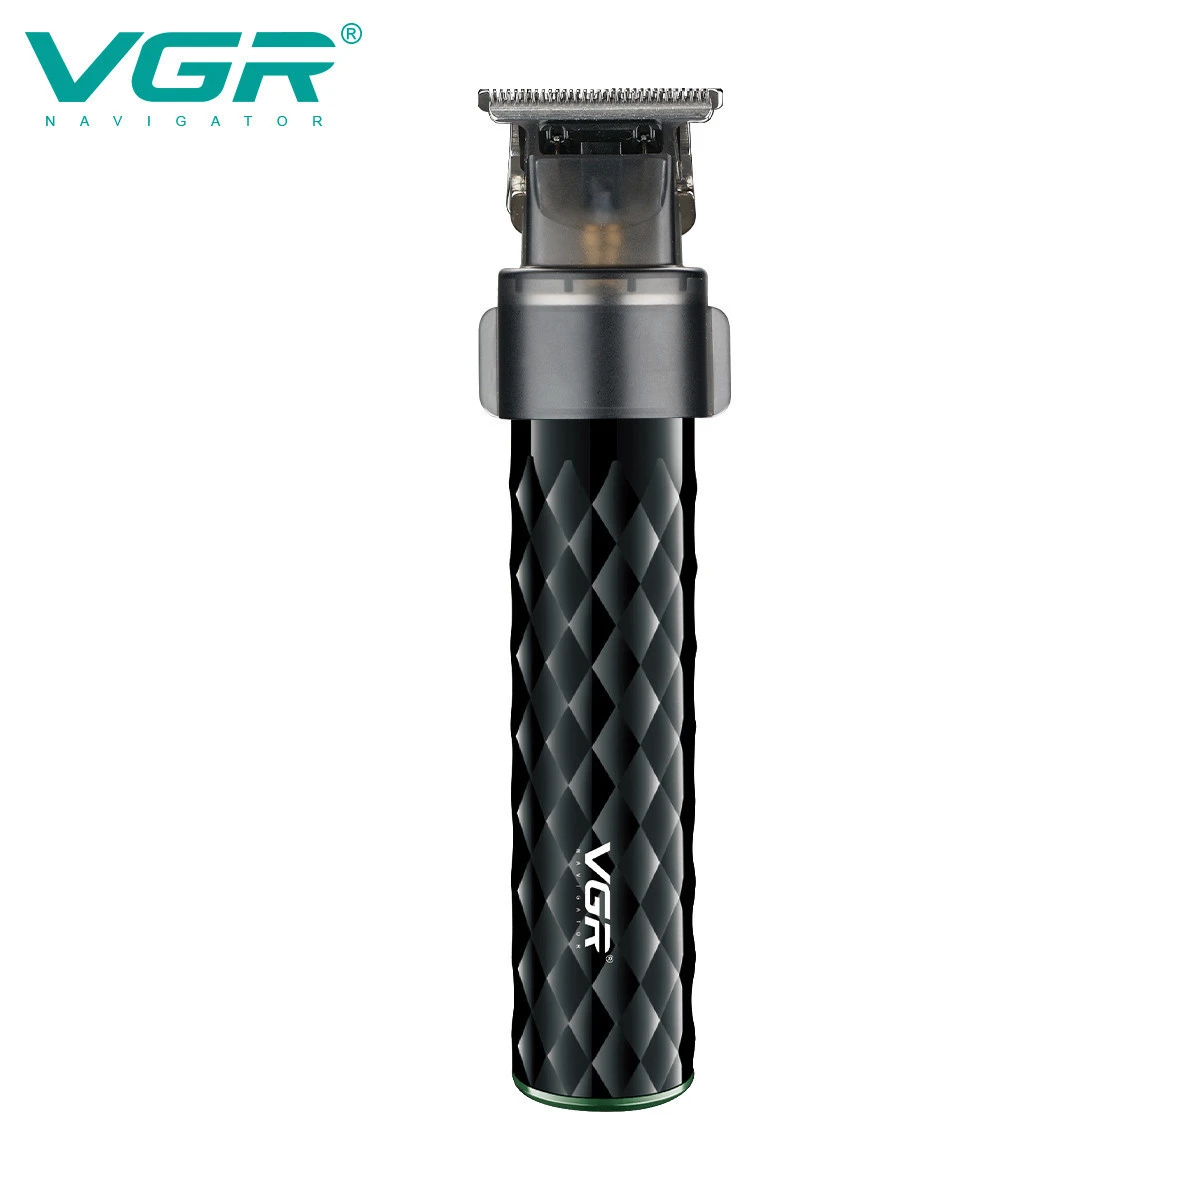 VGR  trimmer professional electric hair clipper V-170 waterproof hair trimmer d8 hair trimmer for men